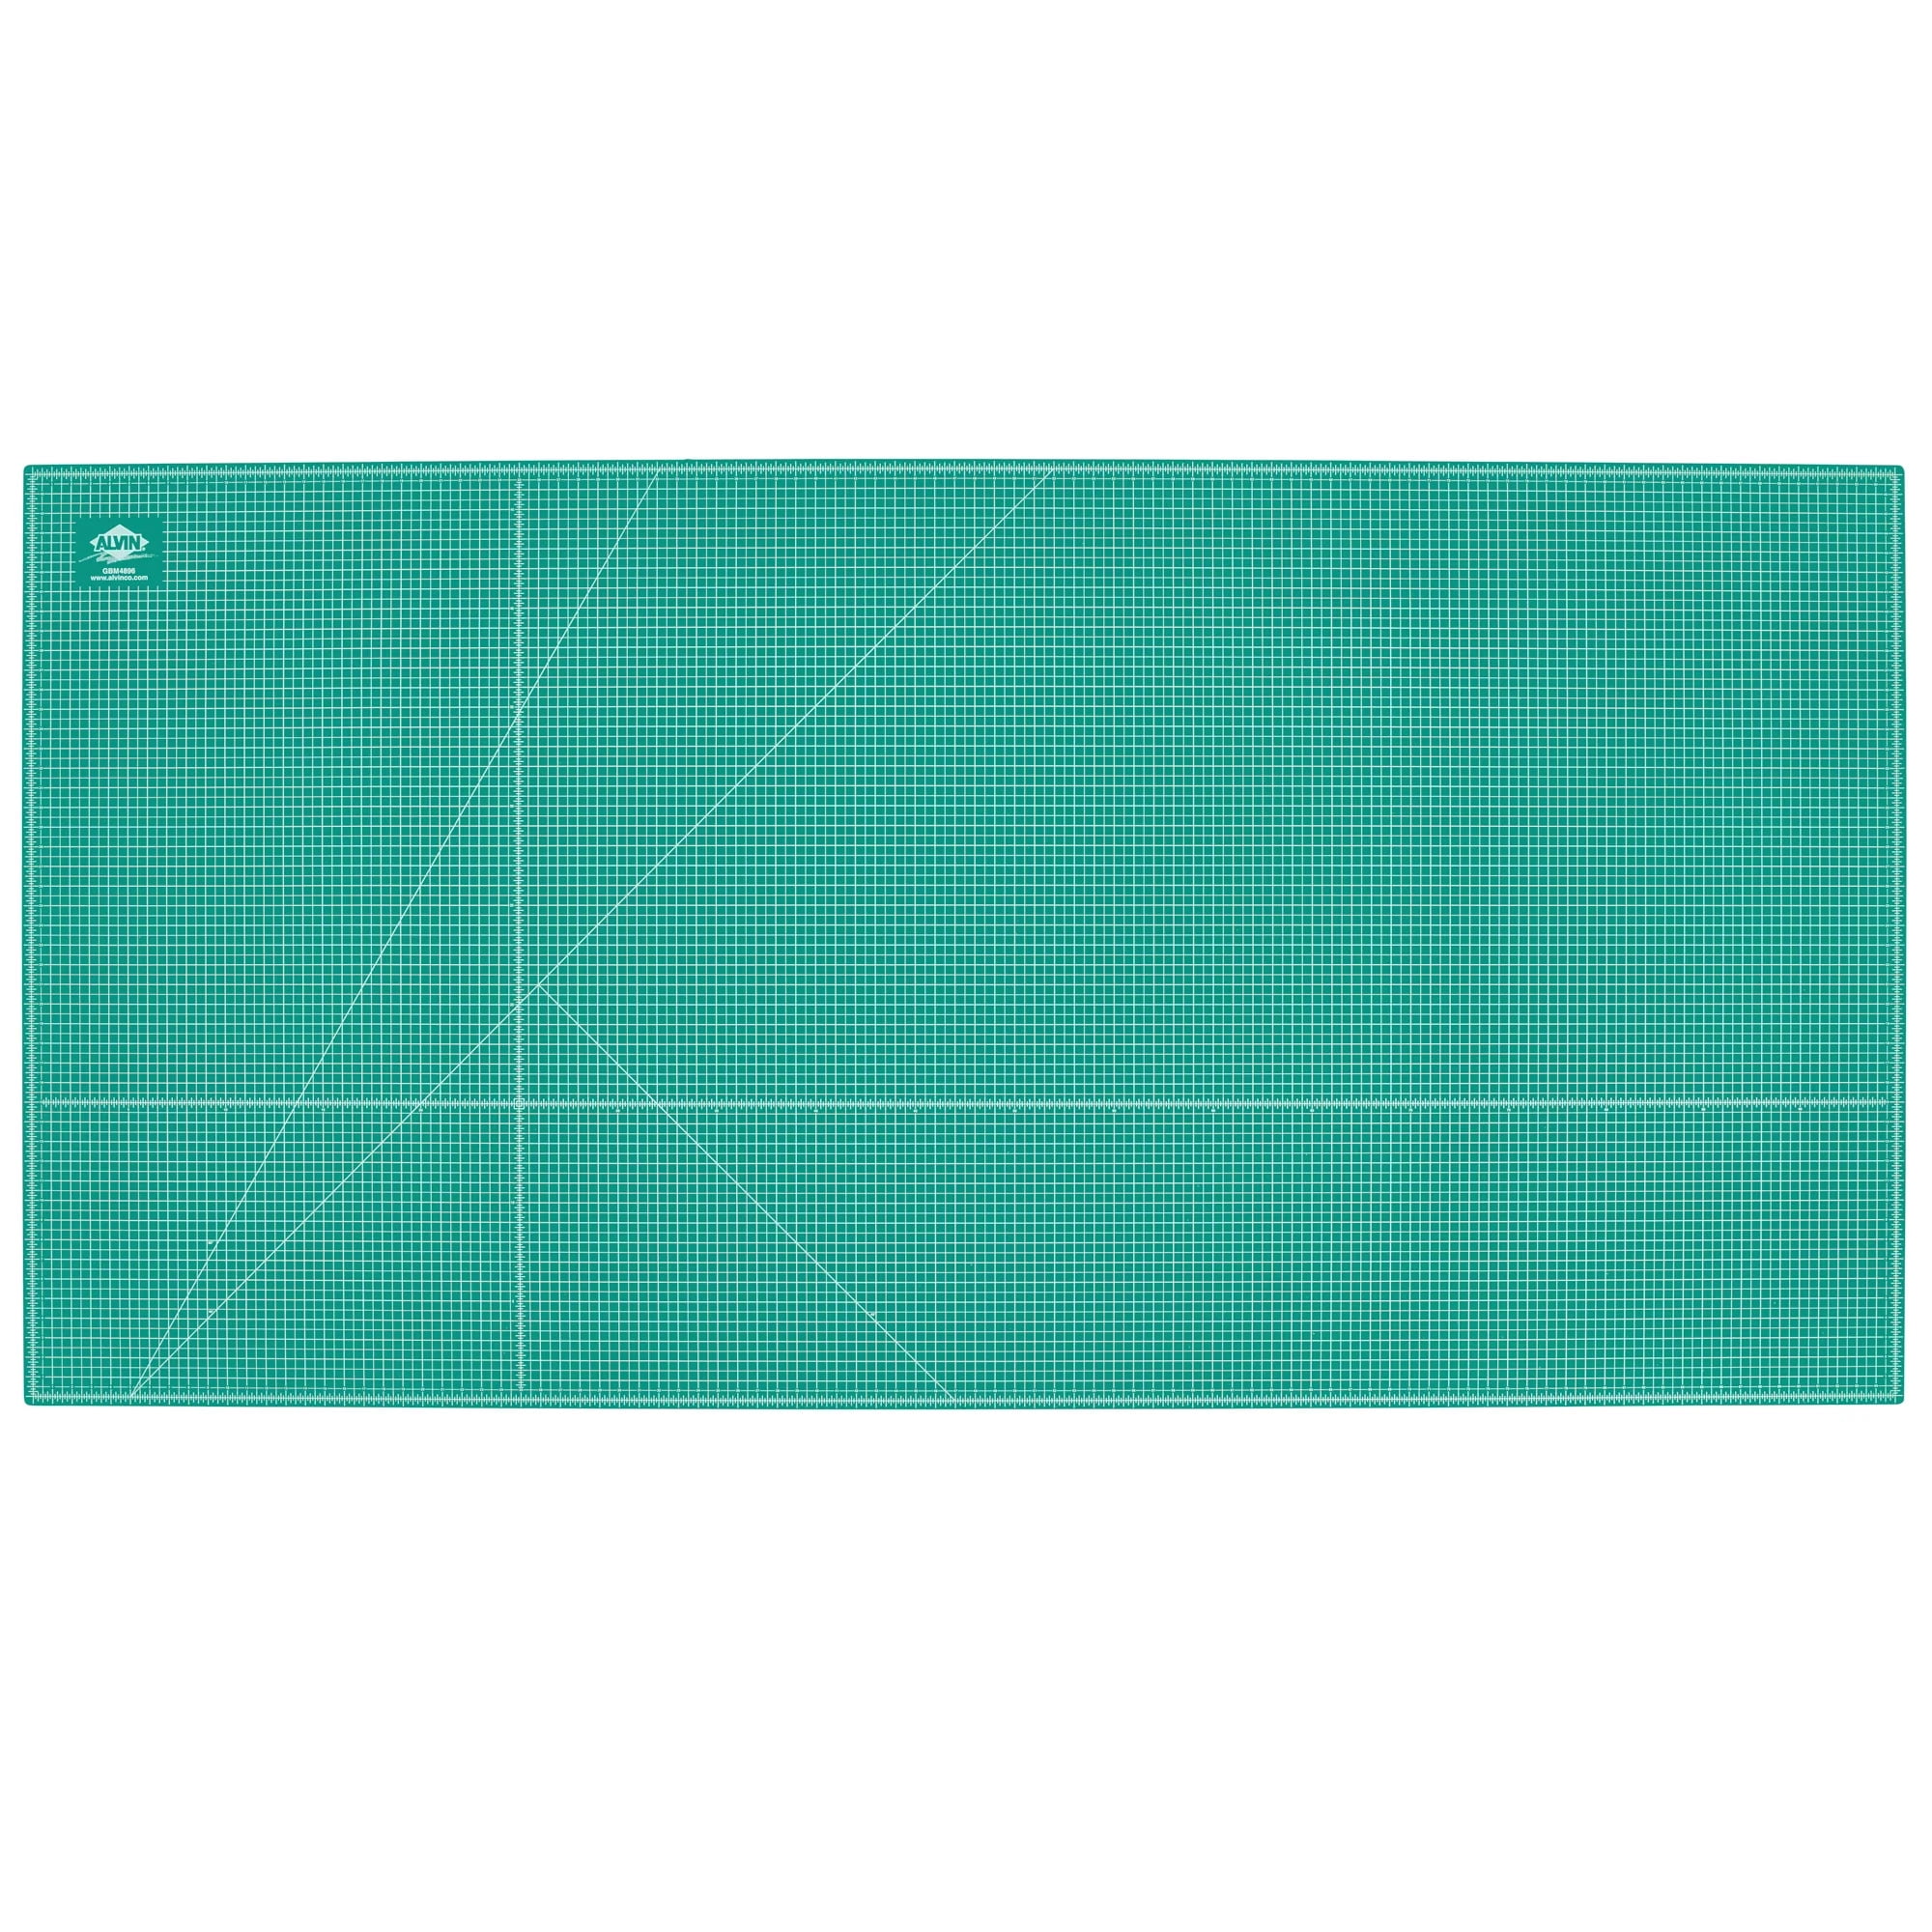  worklion self healing cutting mat 36 x 48 for sewing